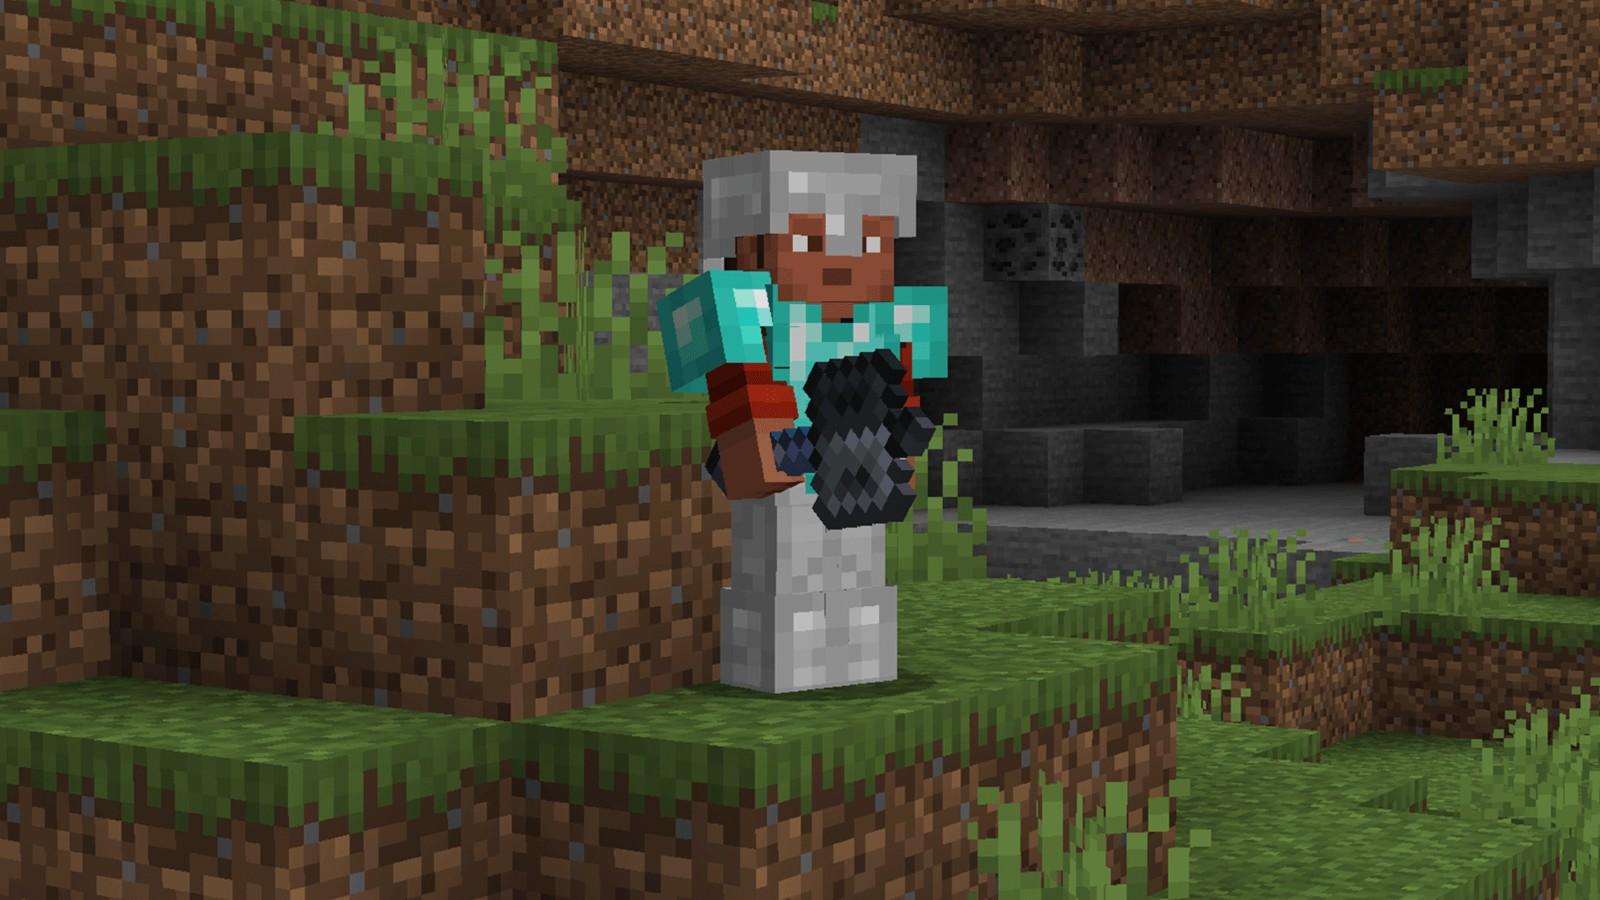 An image of a player with a Mace in Minecraft.